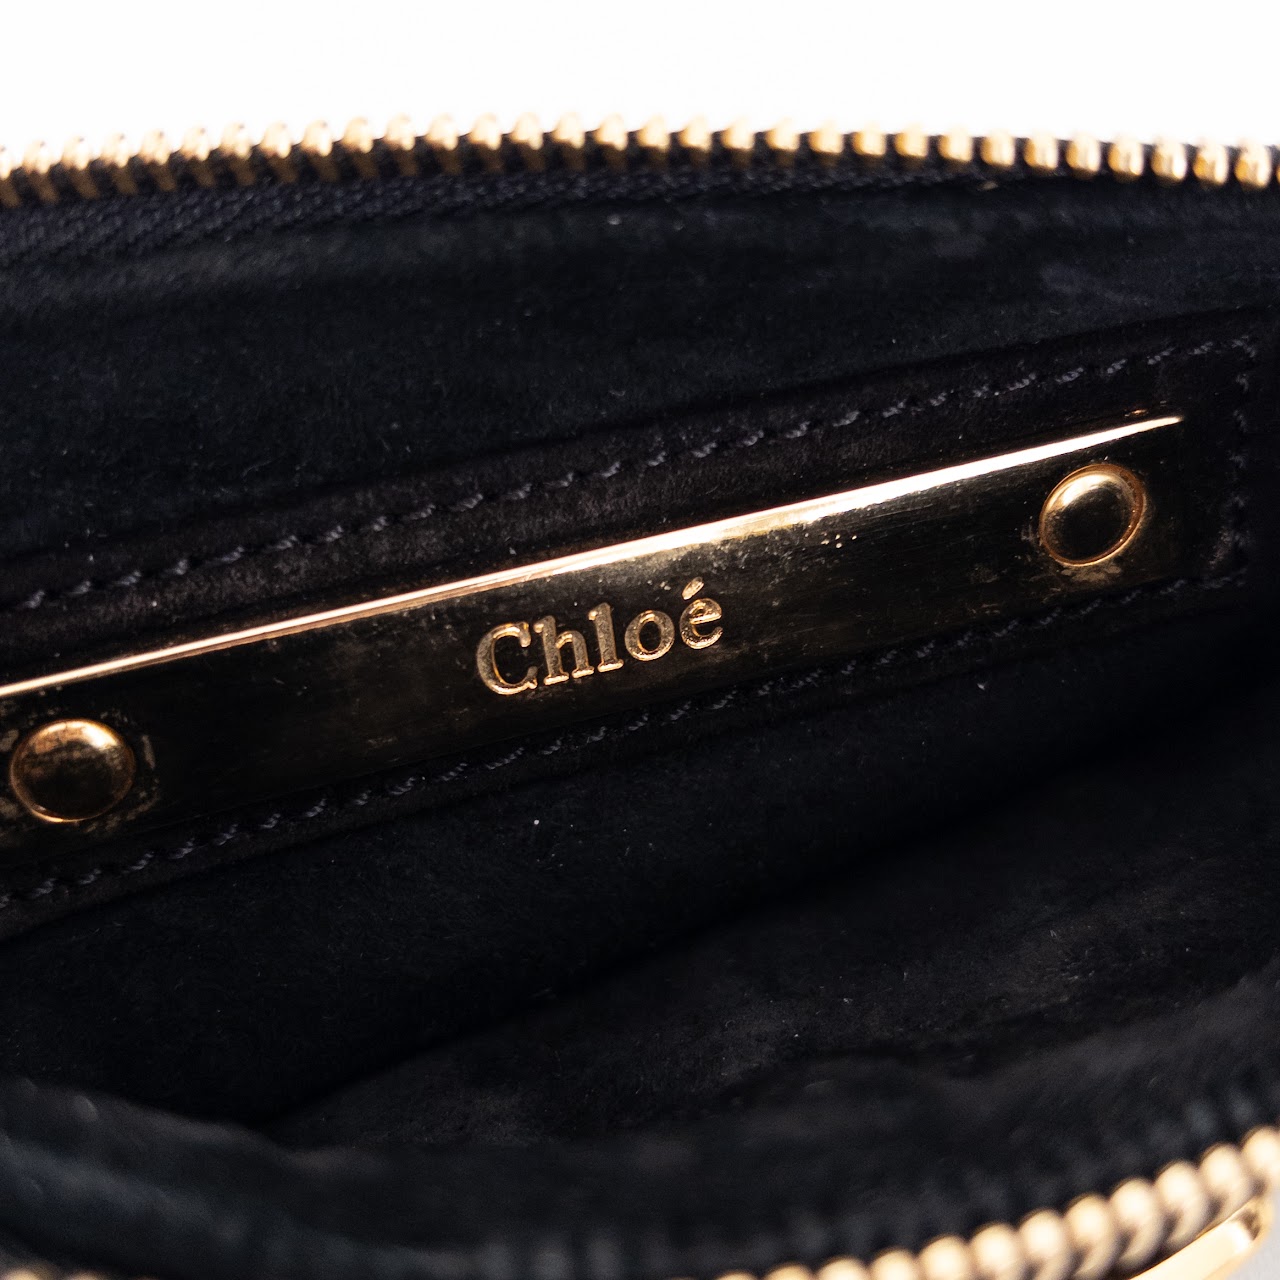 Chloé Highlighted Suede Clutch